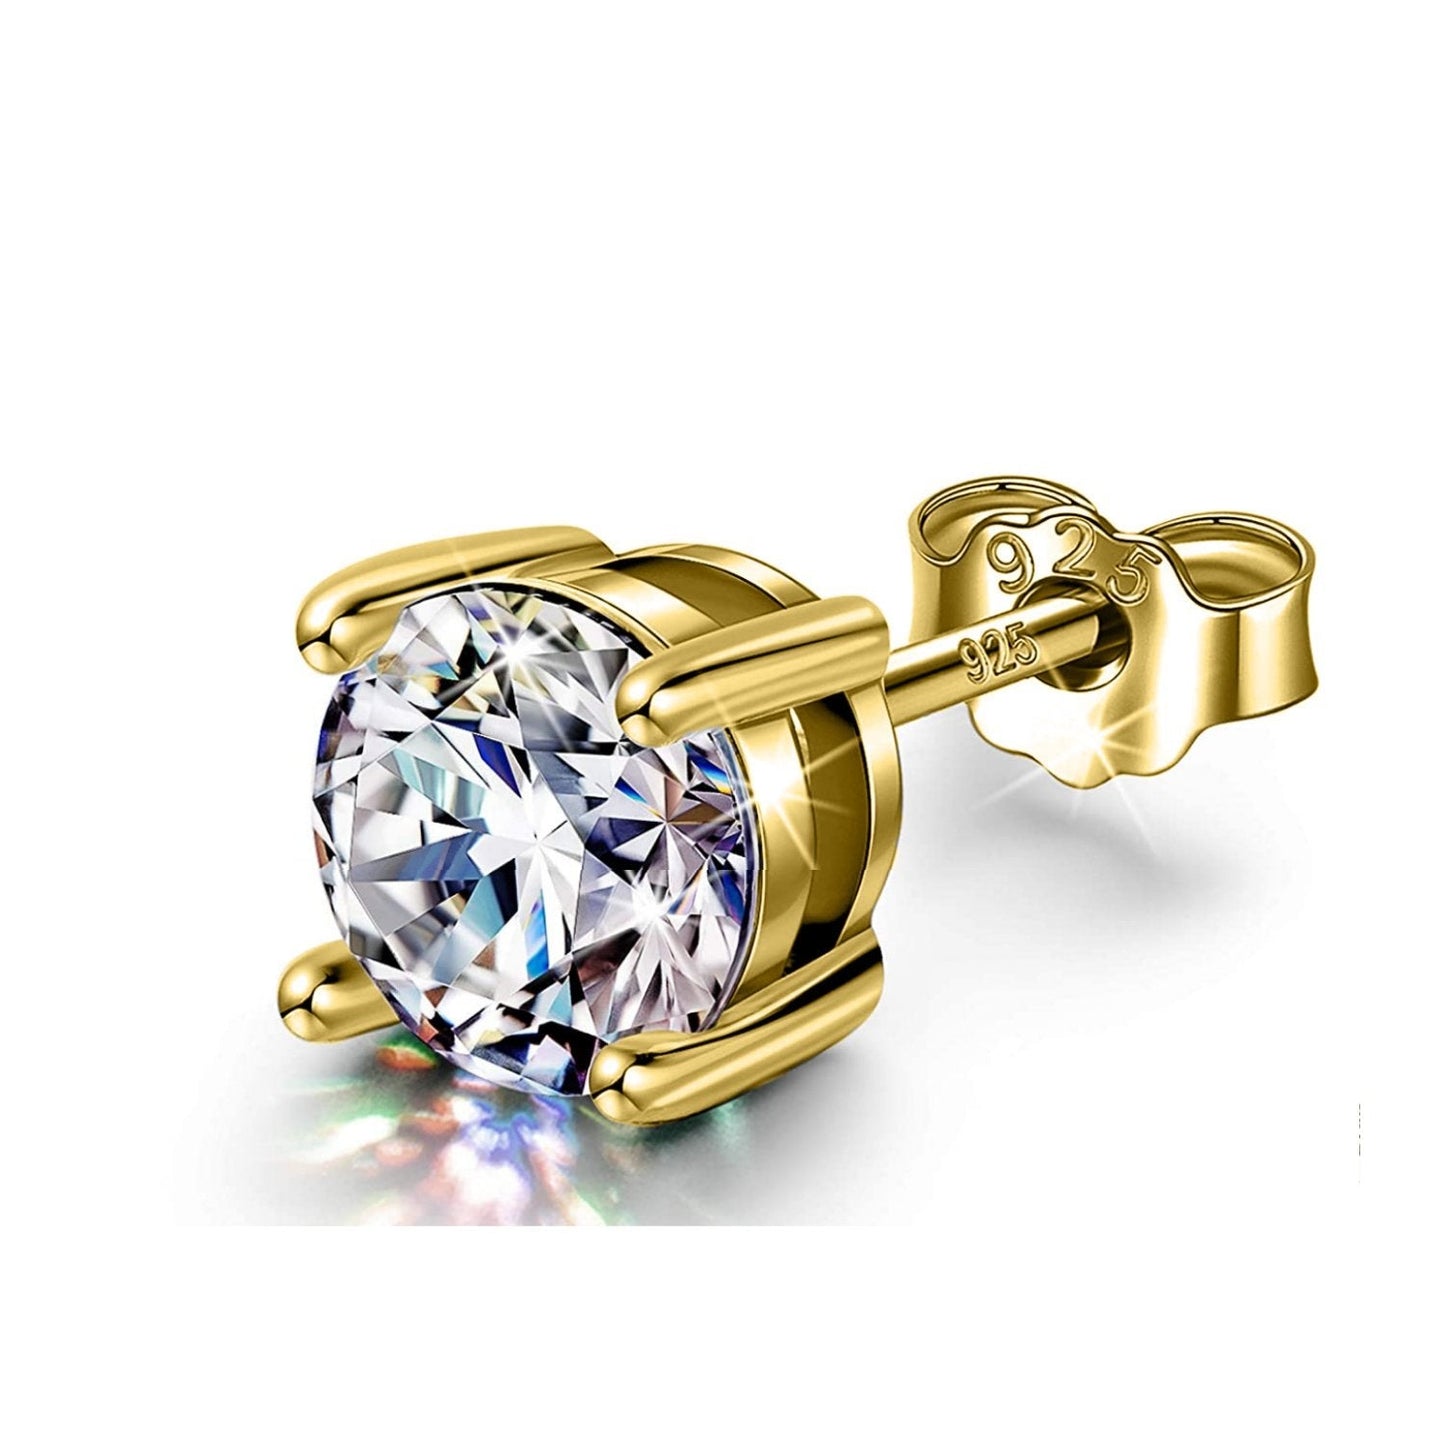 Mens Gold Round Solitaire Earring in 92.5 Silver embellished with Swarovski Zirconia - 92.5 Silver in 18K Gold Finish